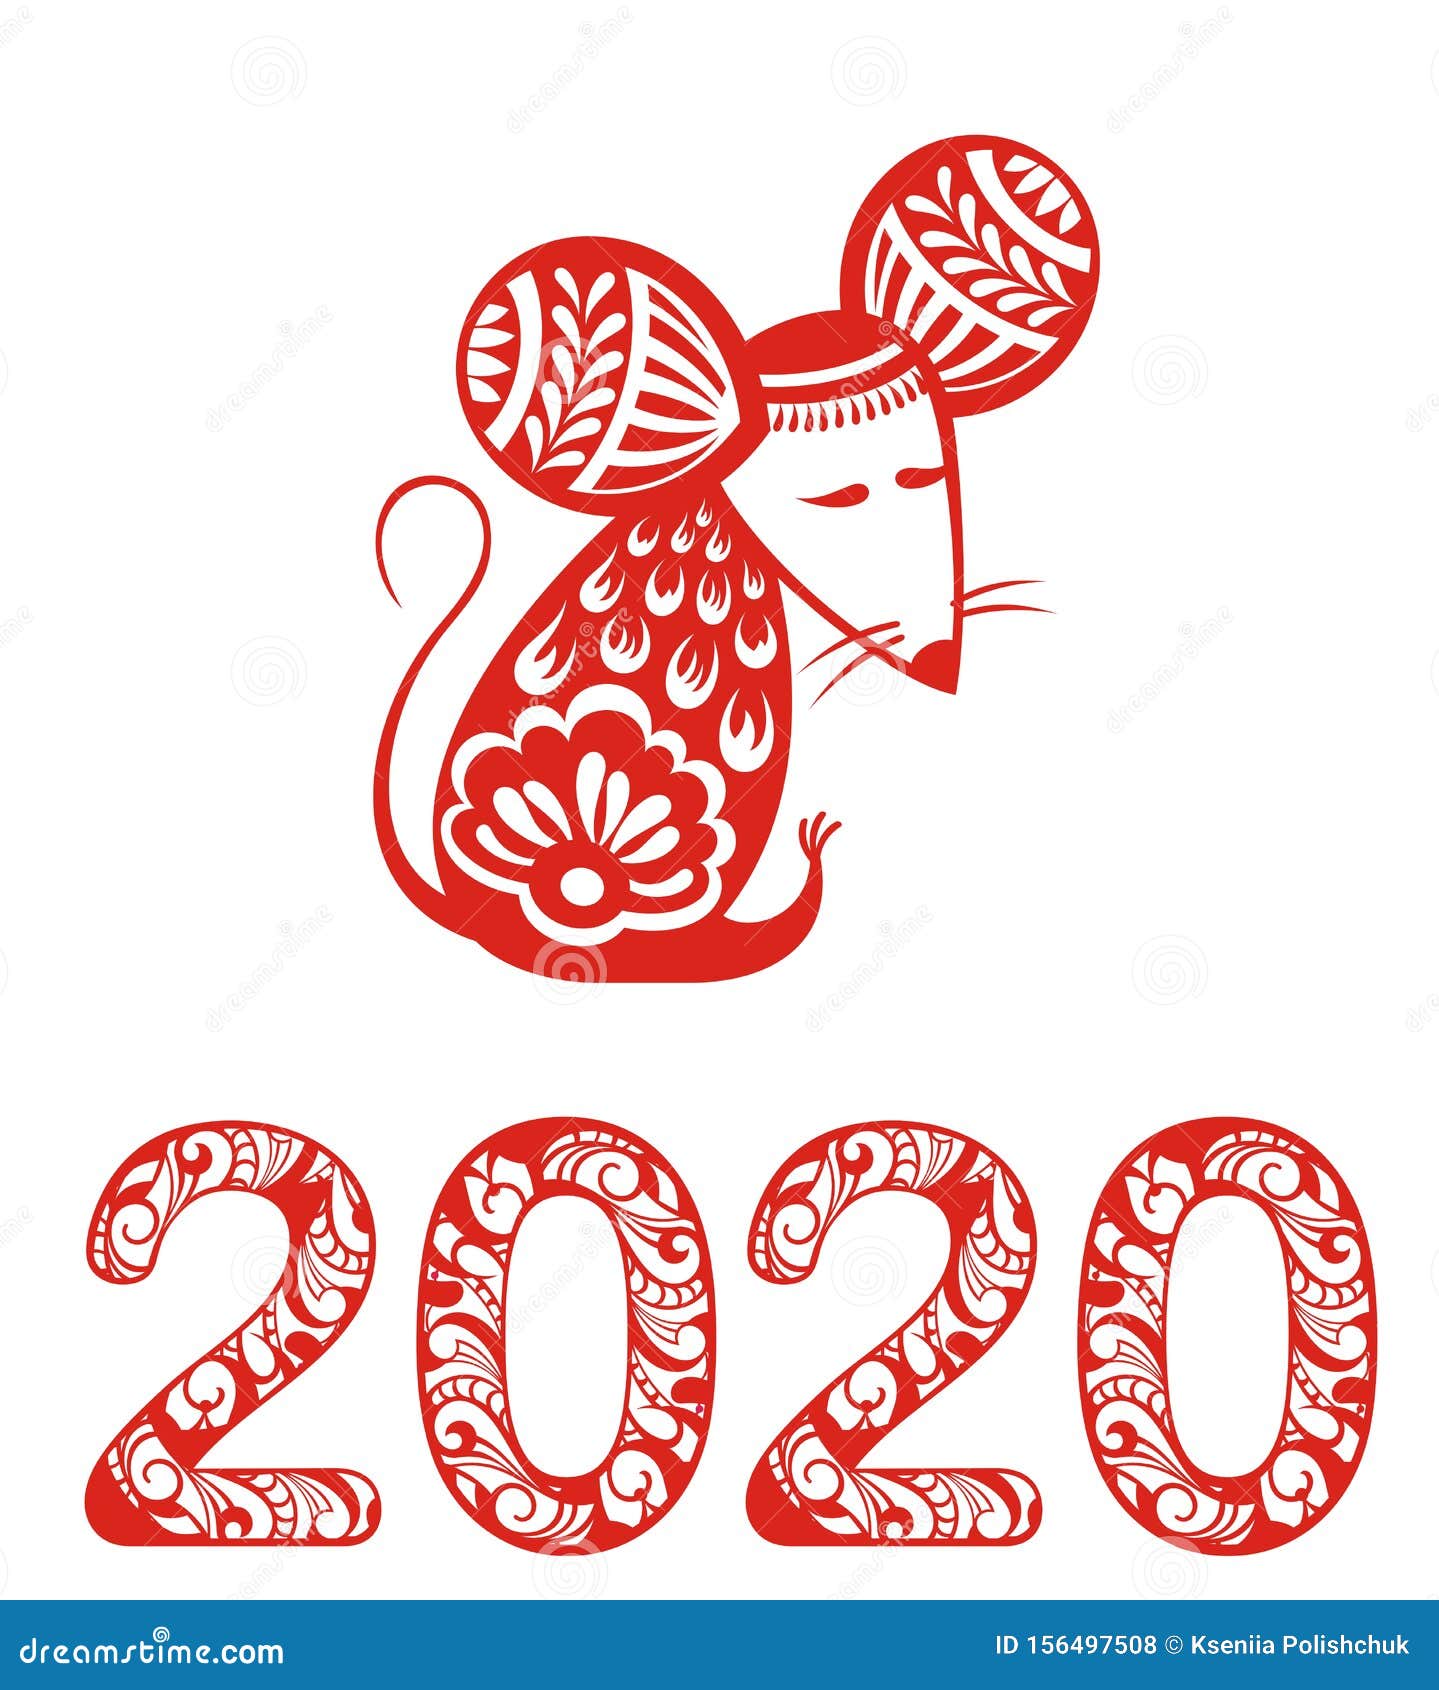 2020 Chinese New Year Greeting Card With Rat Silhouette Stock Vector - Illustration of ...1439 x 1689